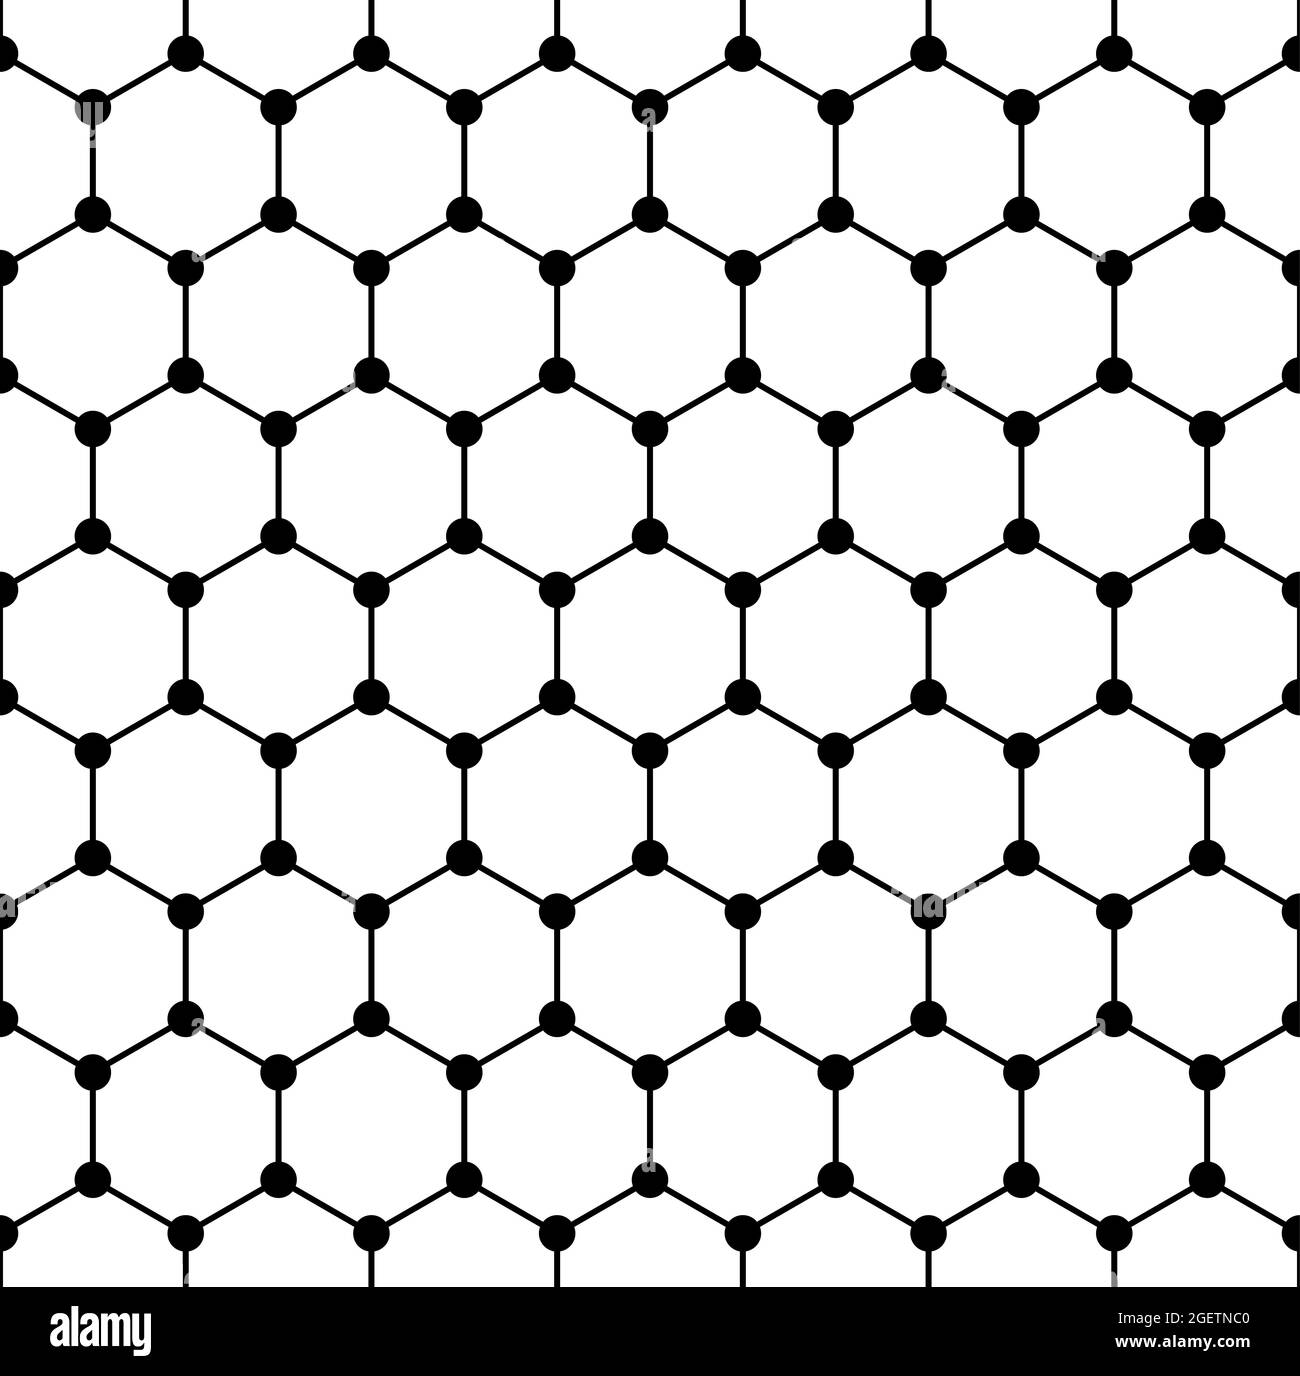 Graphene structure, seamless tile, schematic molecular structure of graphene, an allotrope of carbon, a single layer of carbon atoms in hexagonal grid. Stock Photo